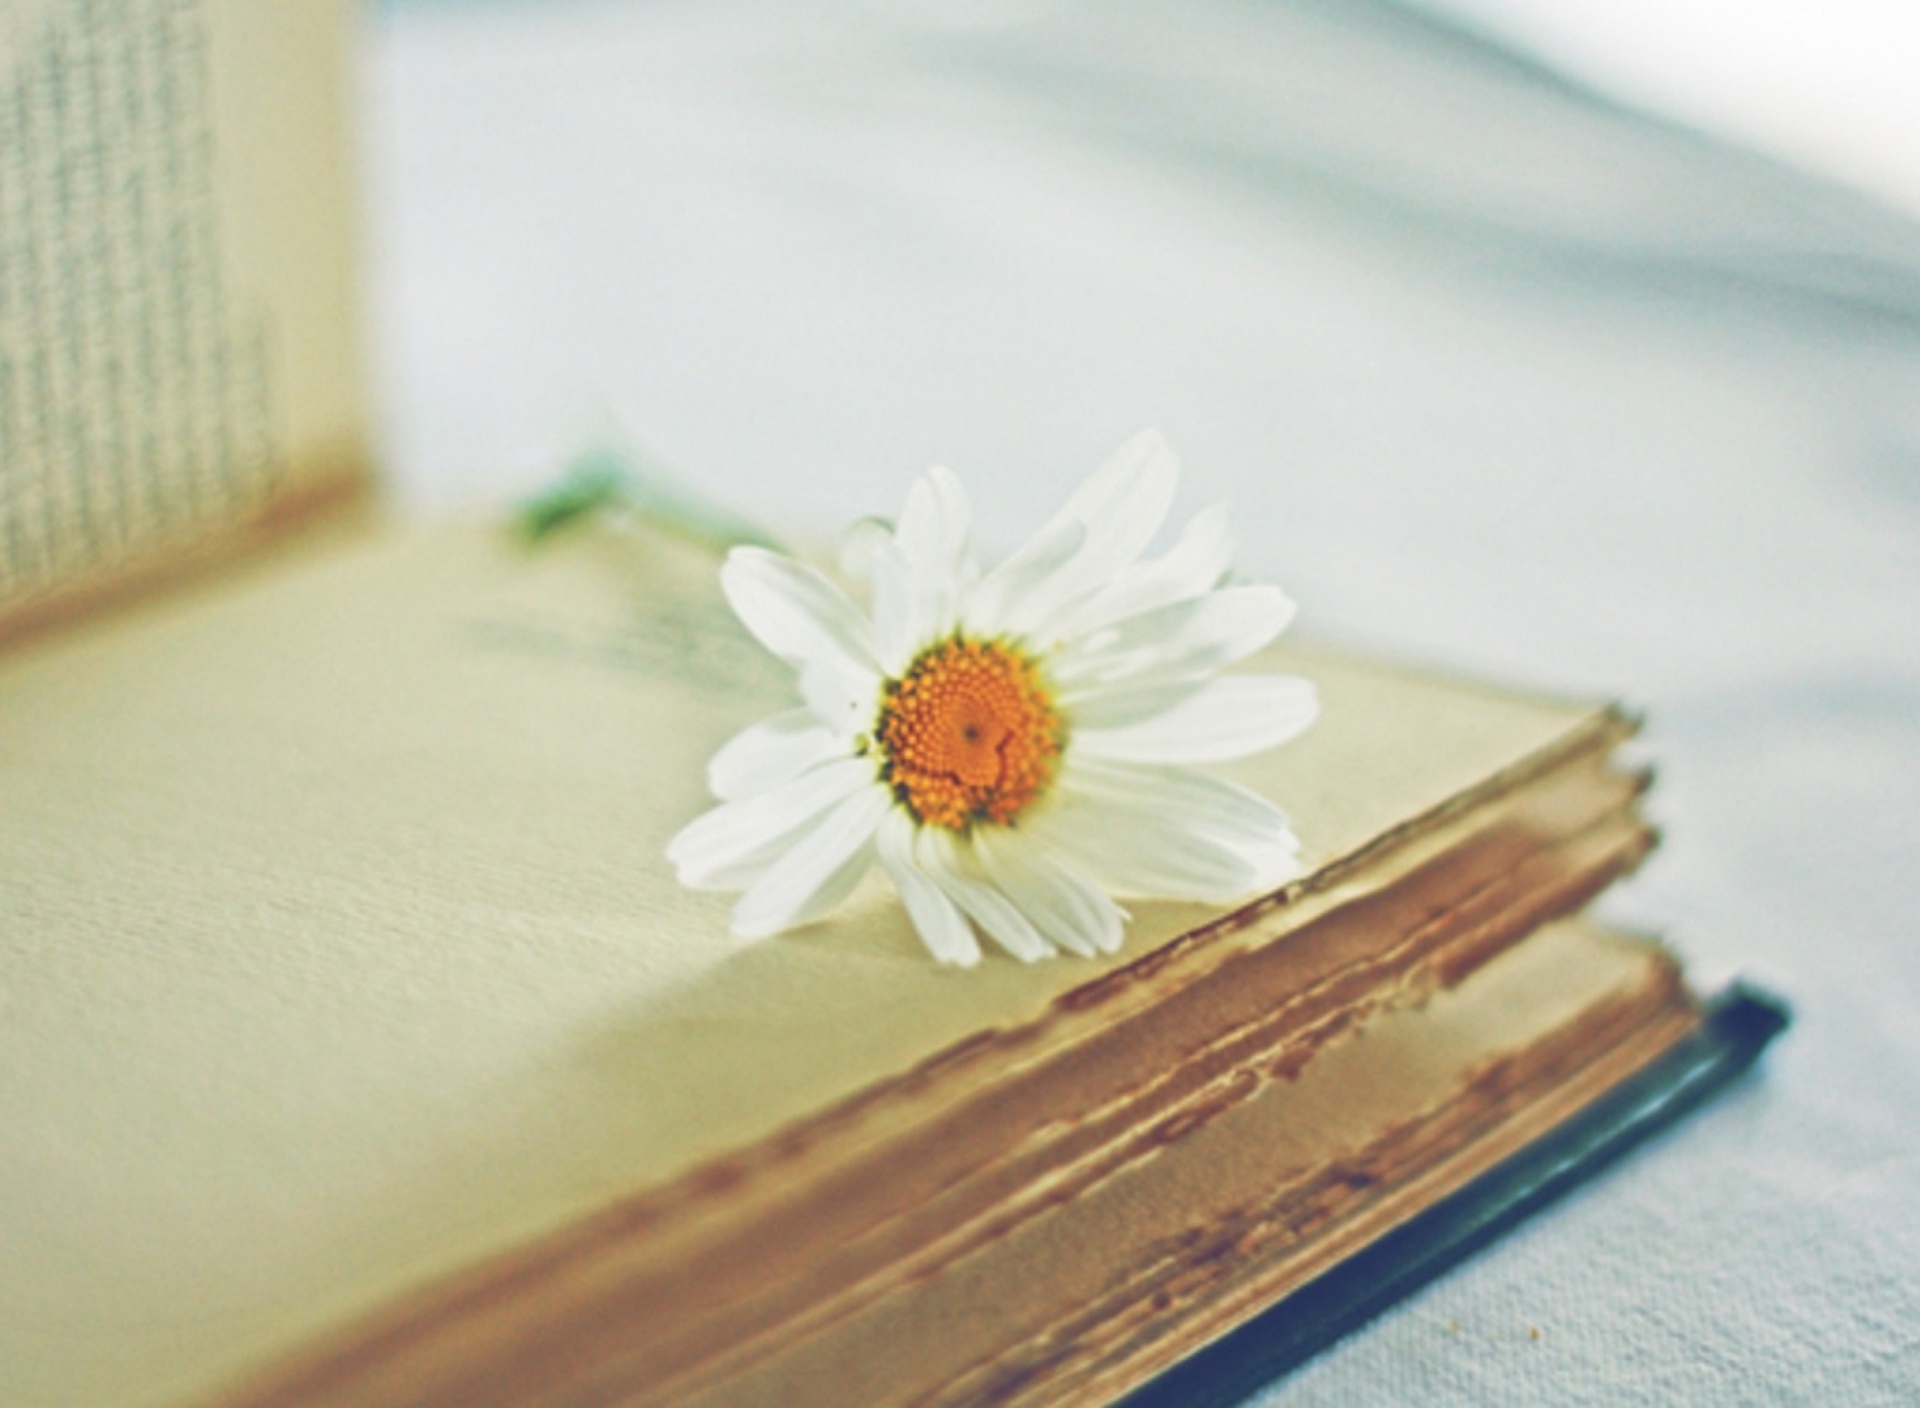 Book And Daisy wallpaper 1920x1408